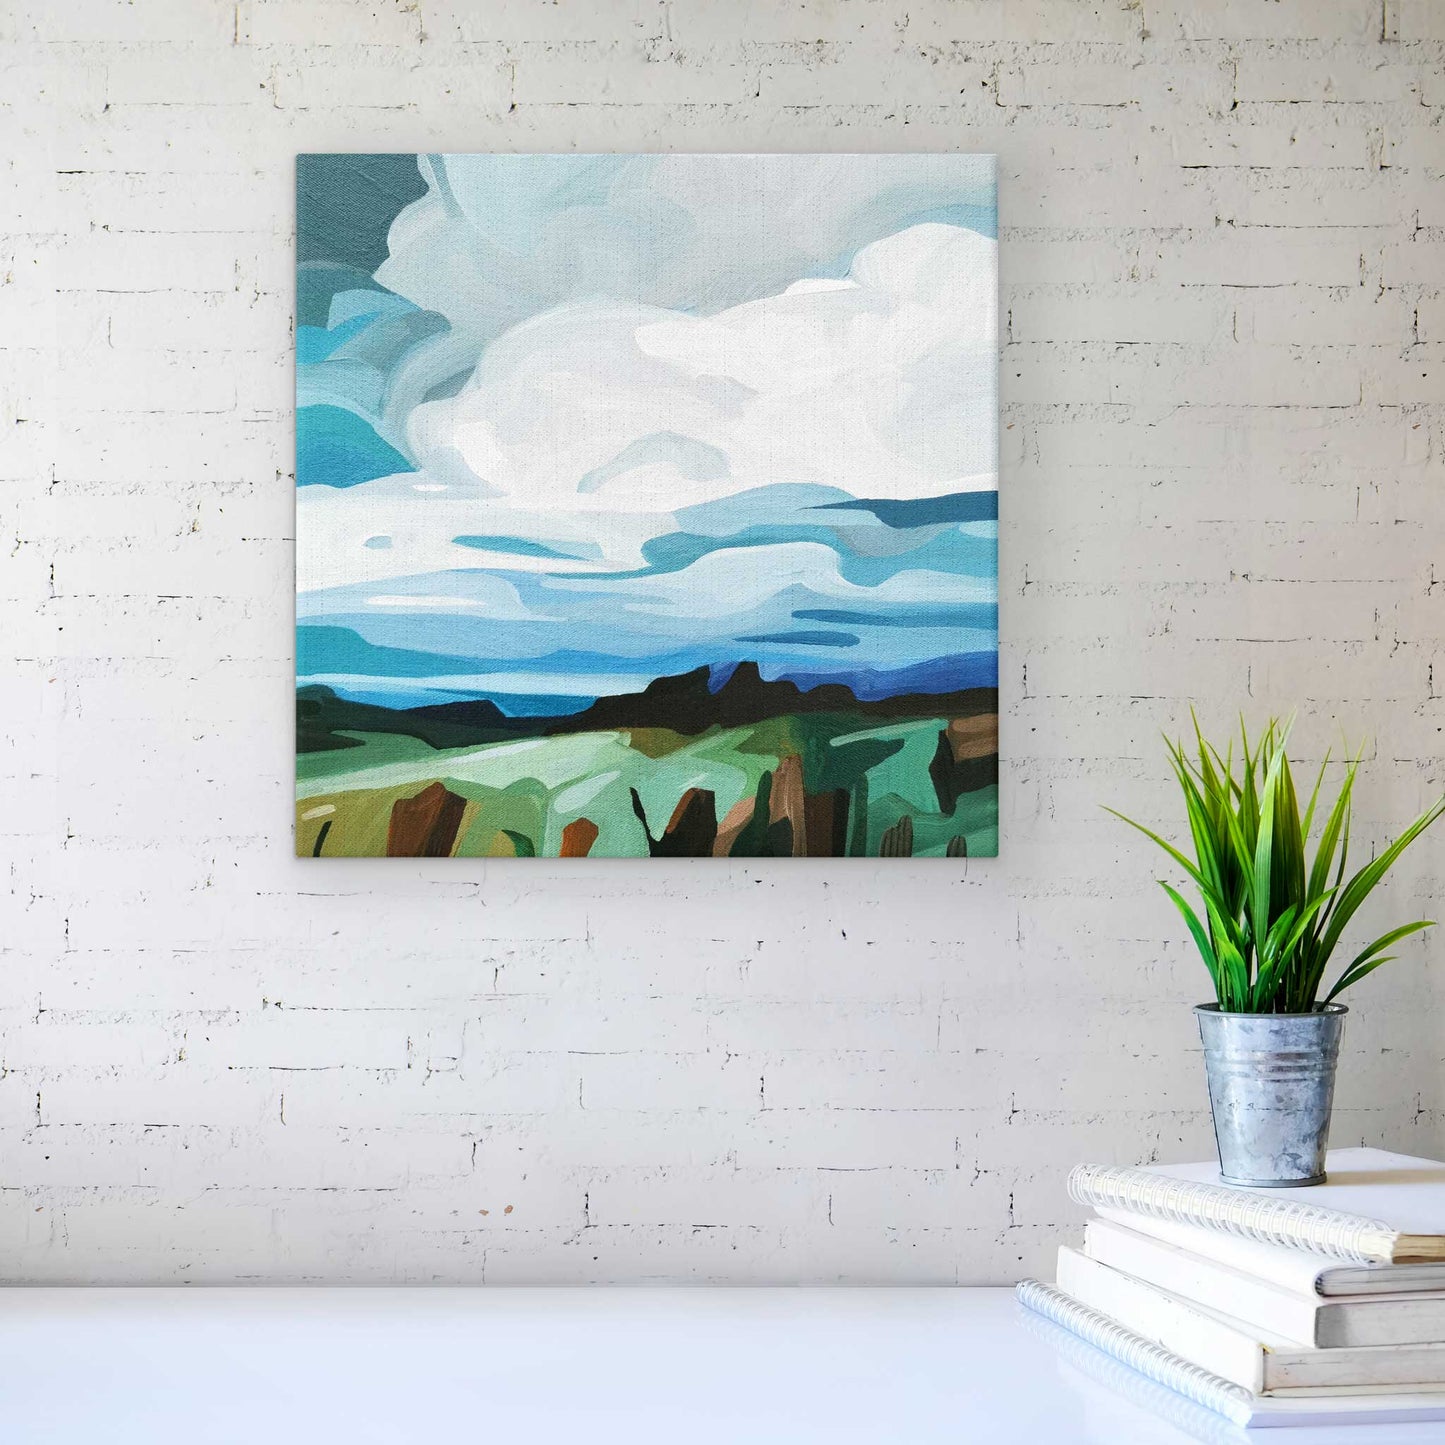 Contemporary abstract lakes & forest landscape acrylic original painting on gallery wrapped canvas by Susannah Bee.